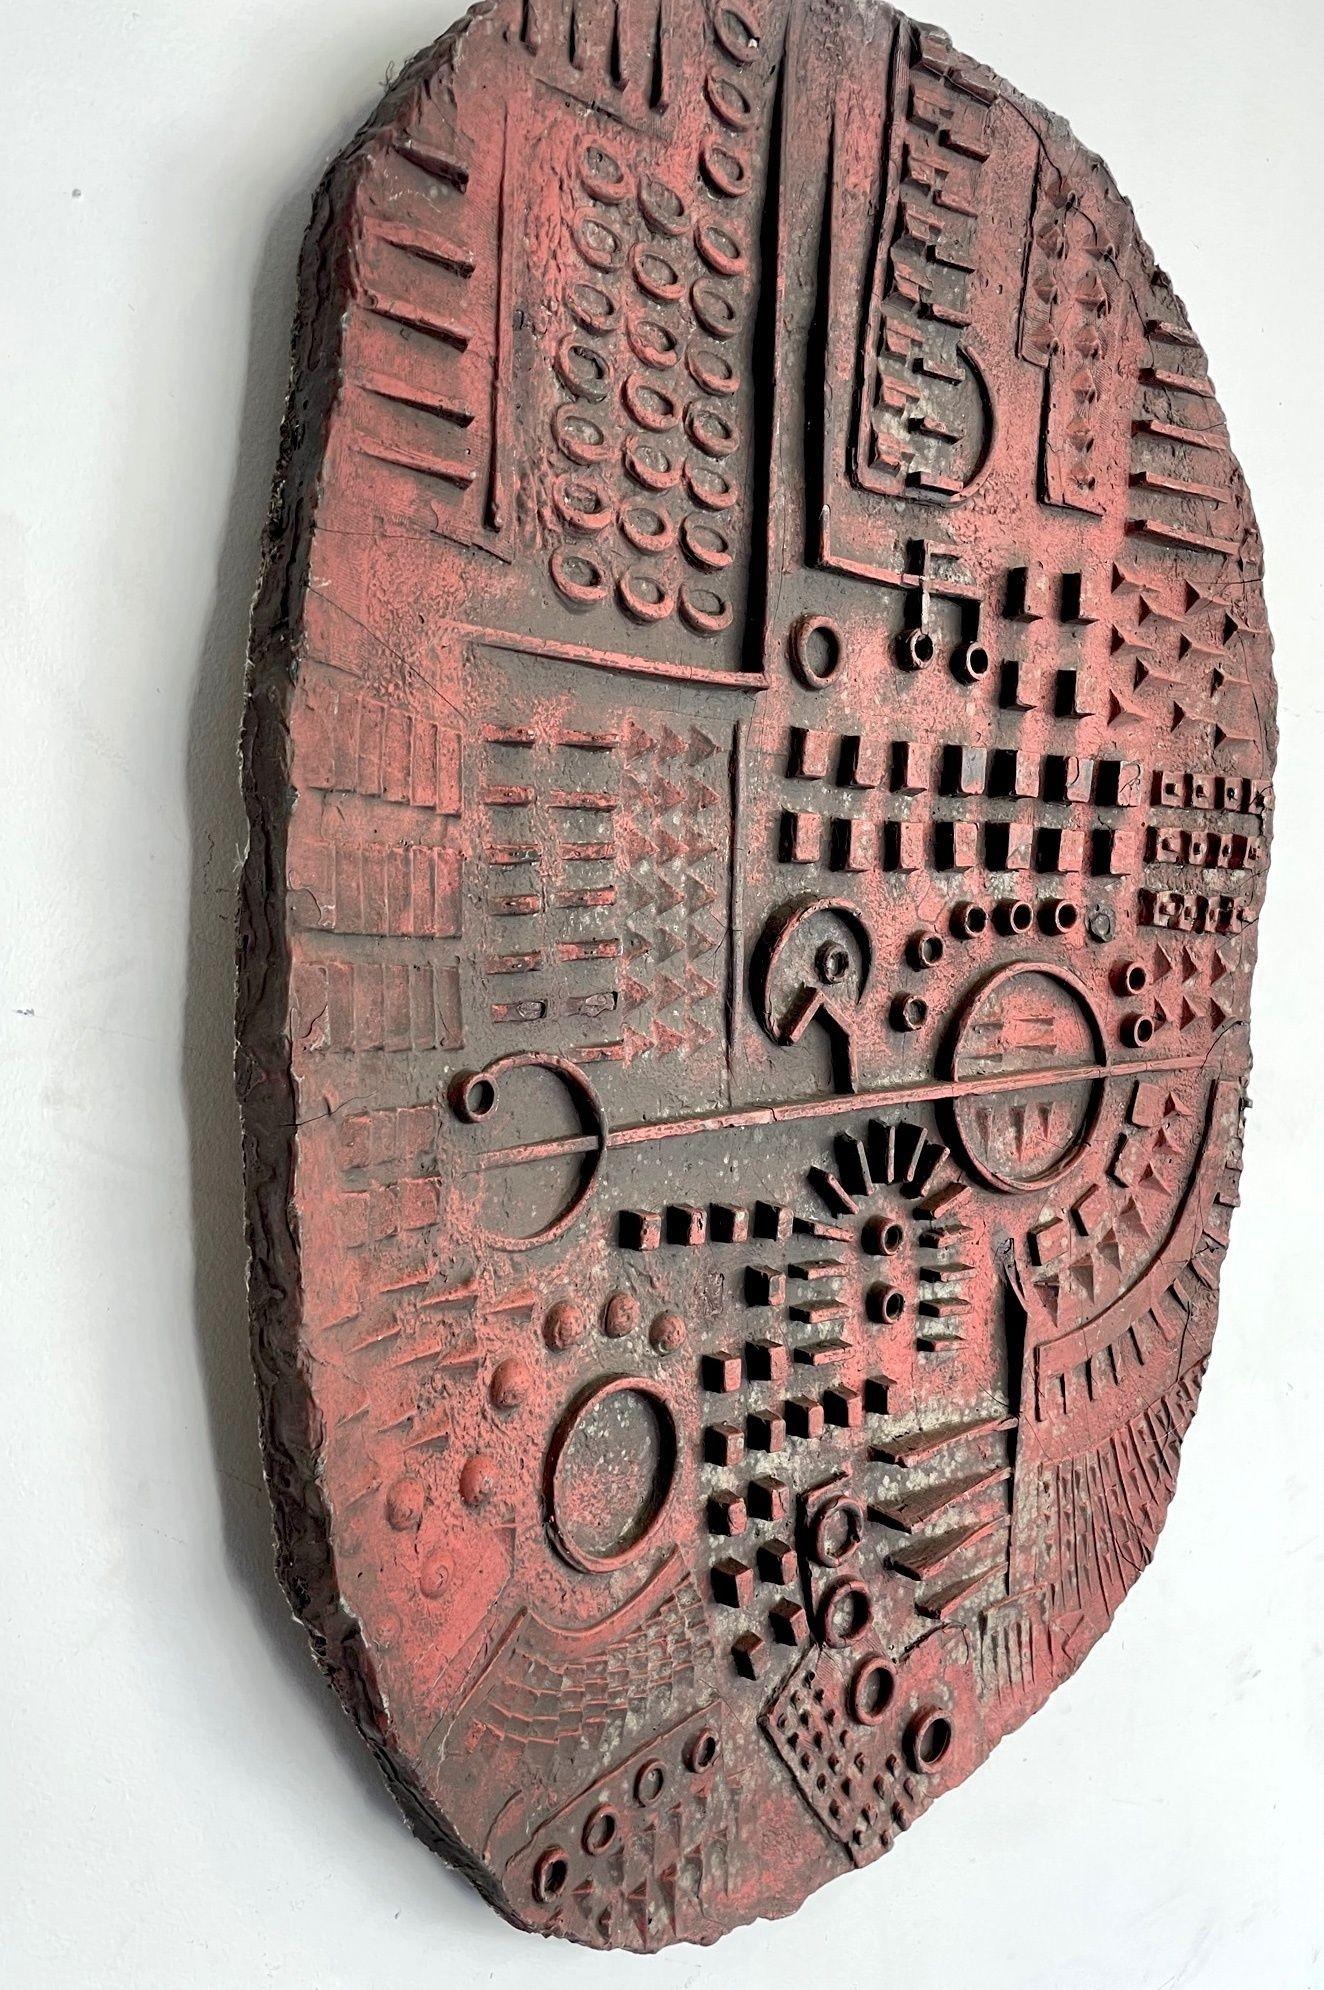 A orignal1960s resin bonded Aztec style wall relief sculpture, by English artist Ron Hitchins
 
Provenance: Orignally exhibited at John Whibley Gallery, 60 George Street, W1, London in 1966 - see attacehd newspaper coverage from the time. 
The